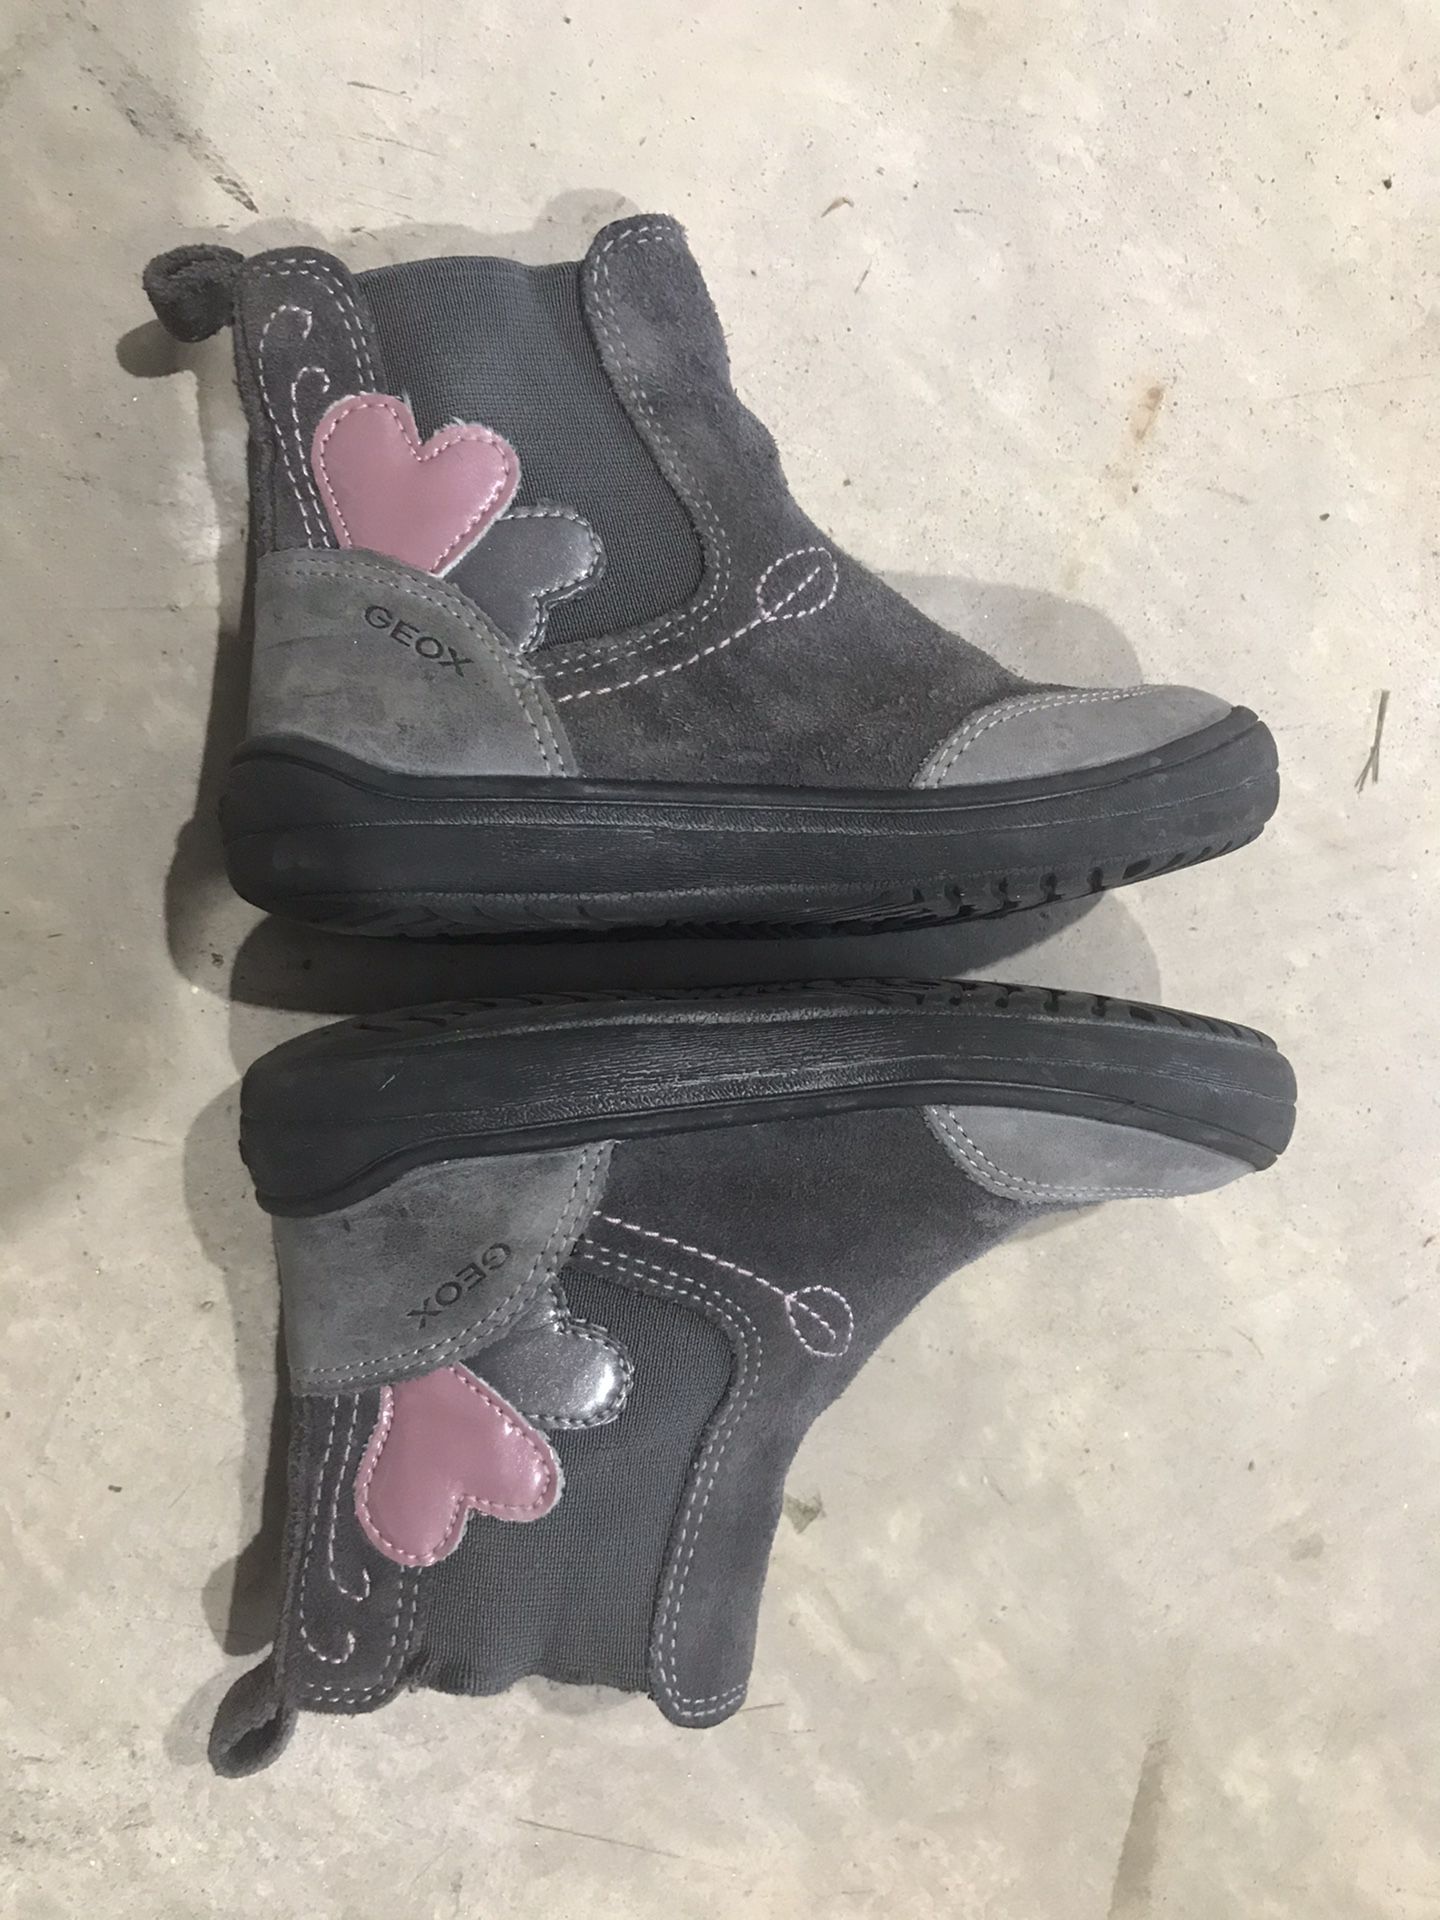 Geox Toddler girl leather boot size 7/8